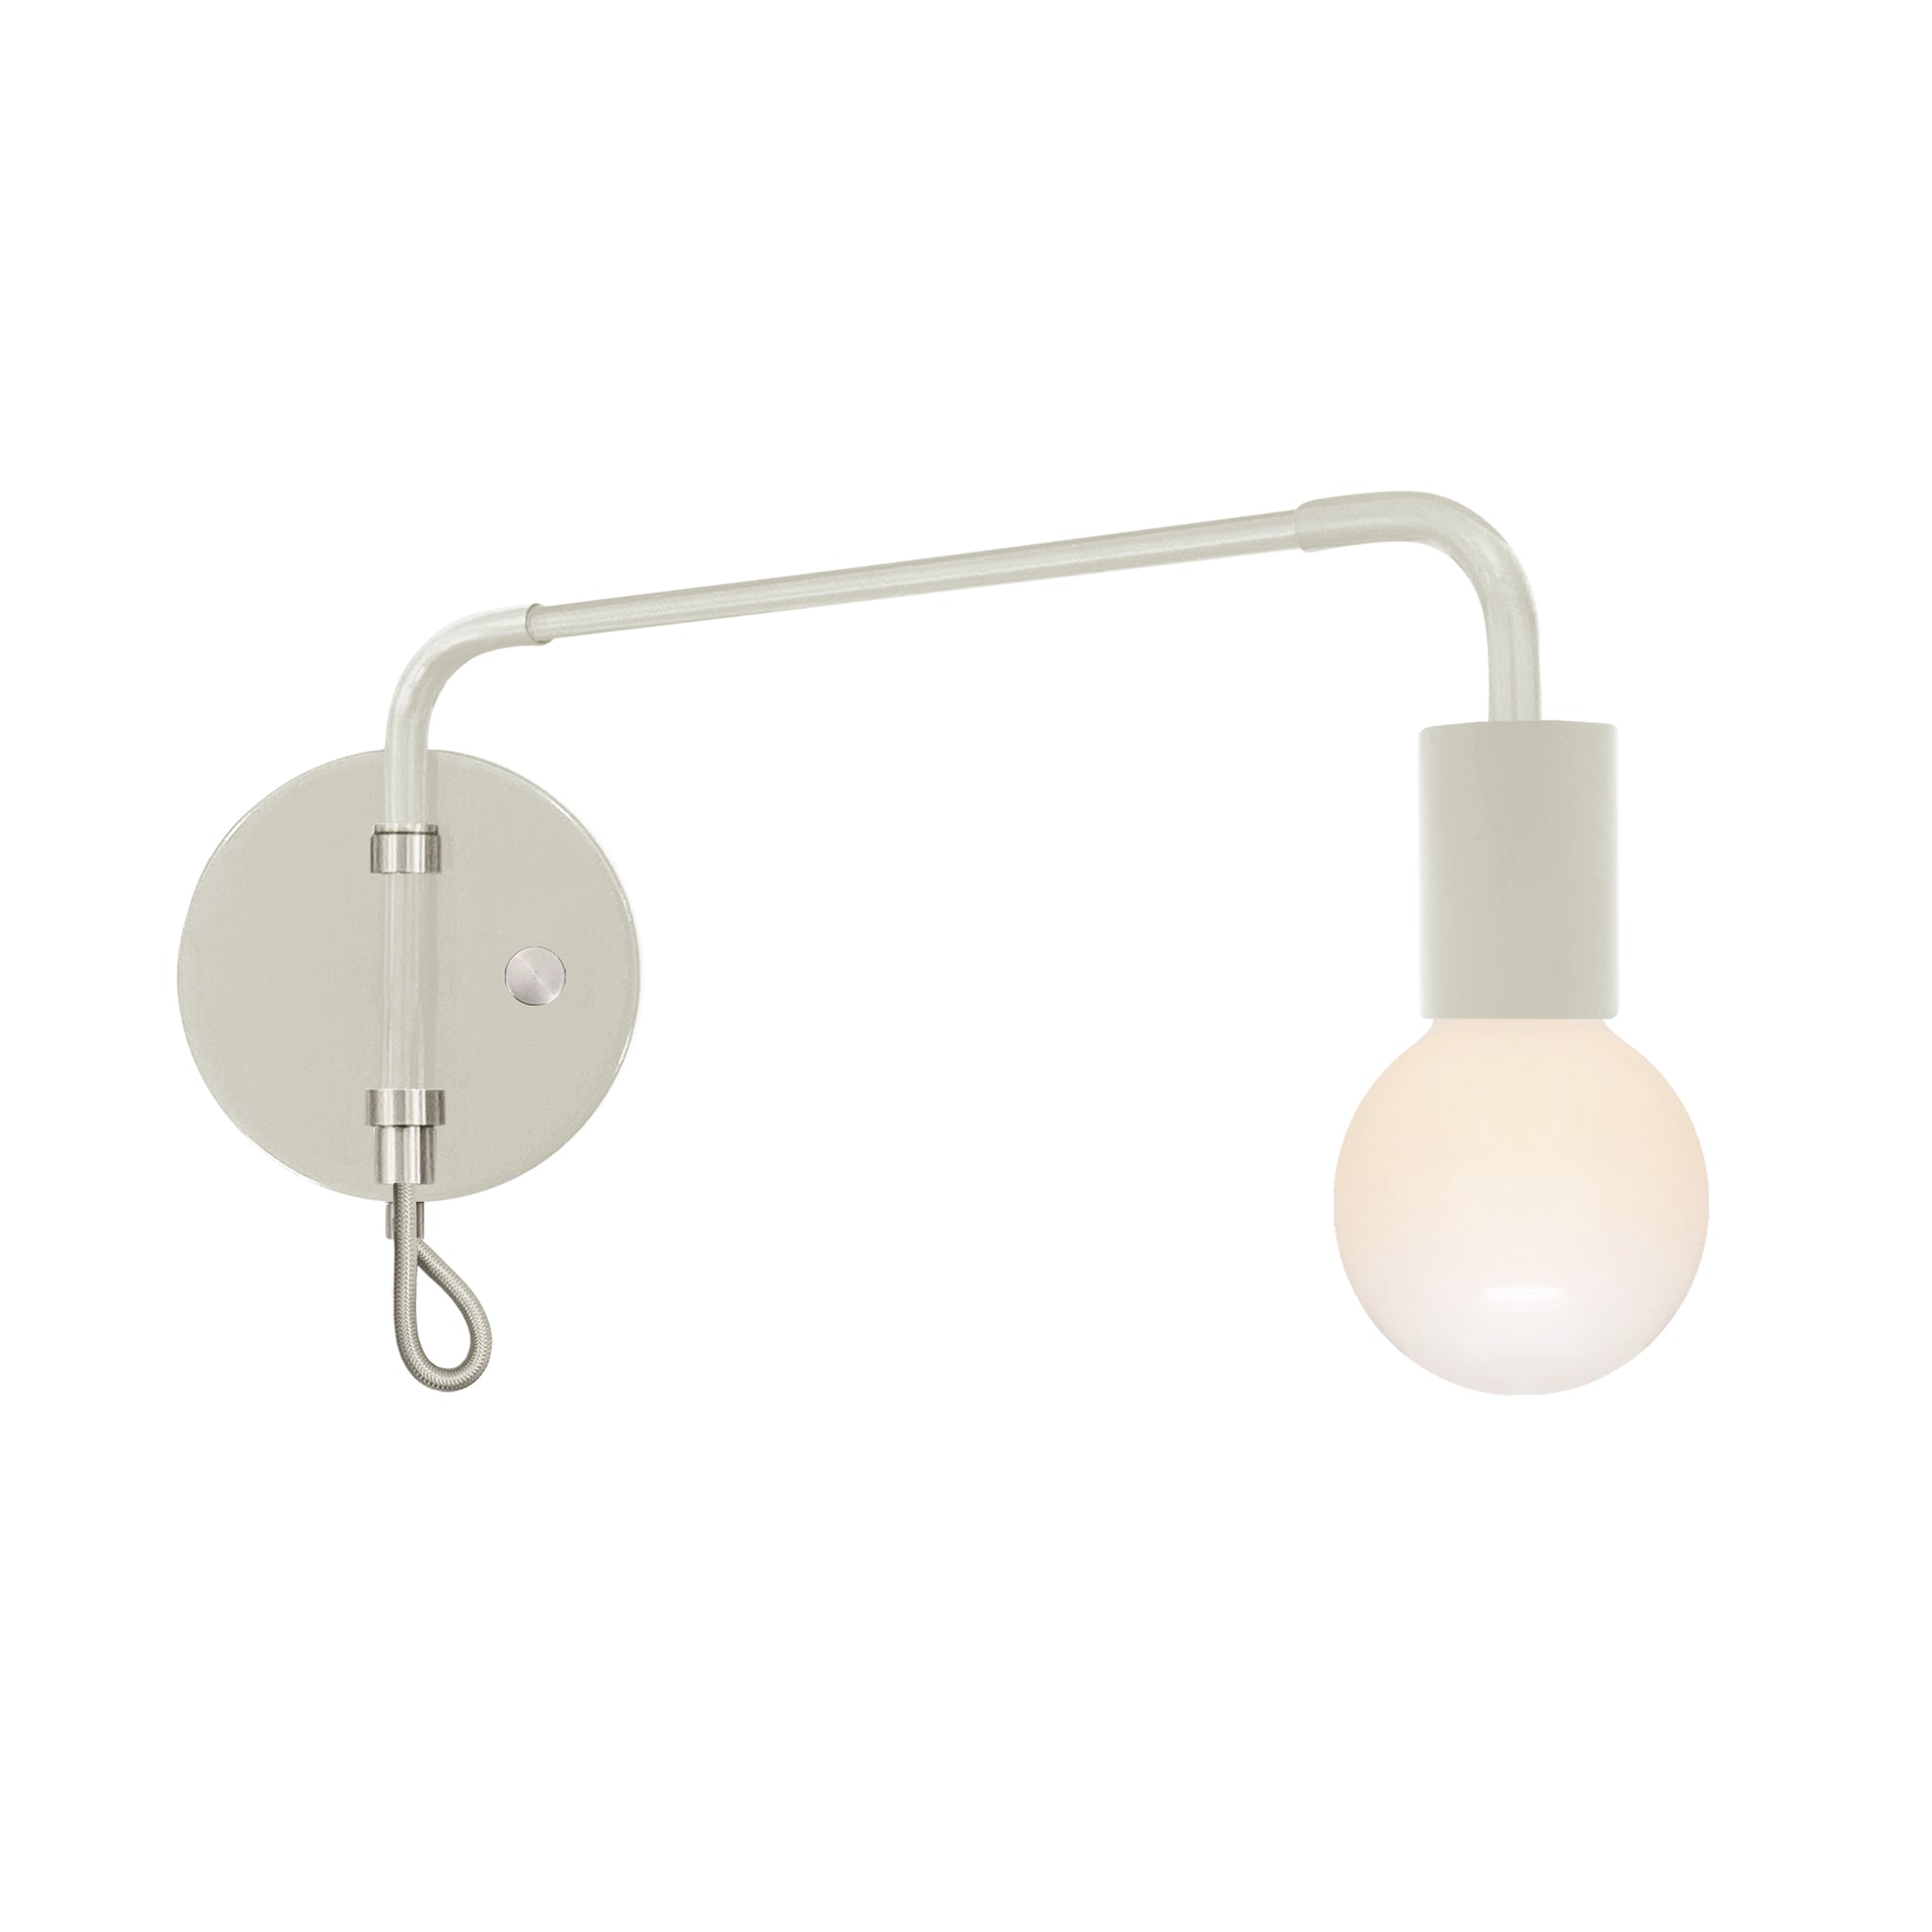 Nickel and bone color Sway sconce Dutton Brown lighting